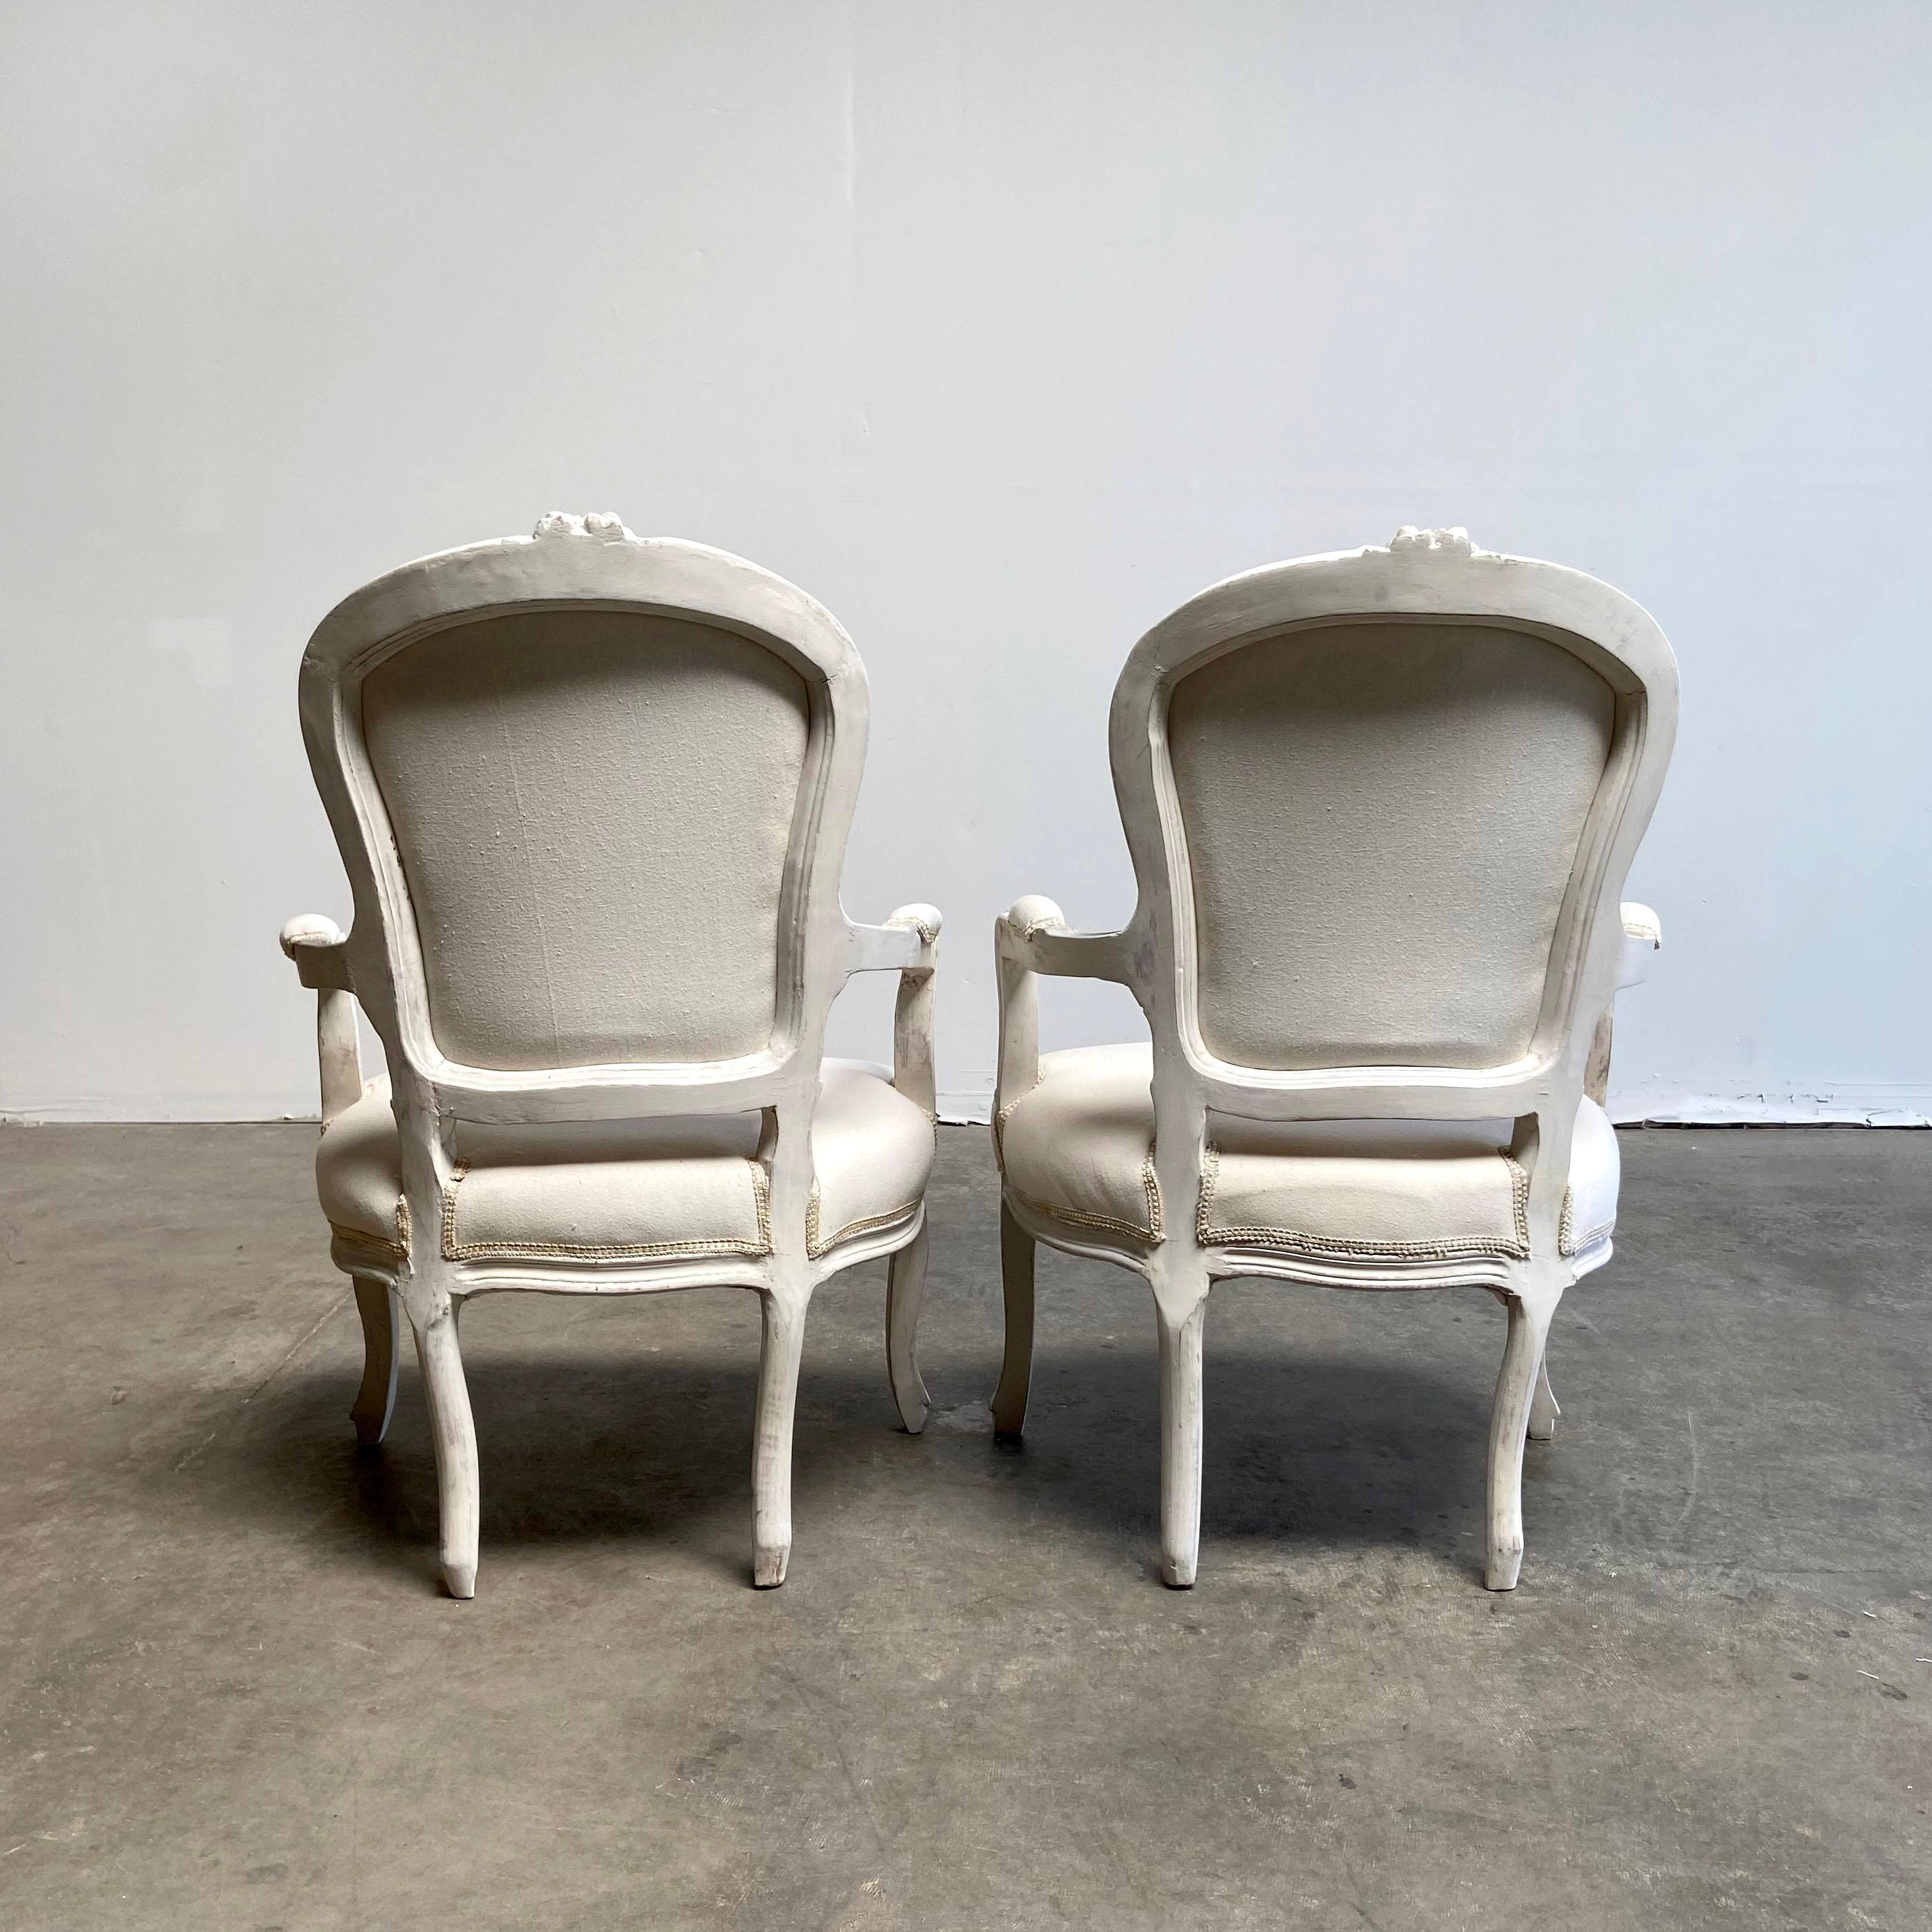 20th Century Vintage Pair of Painted and Upholstered Louis XV Style Open Armchairs